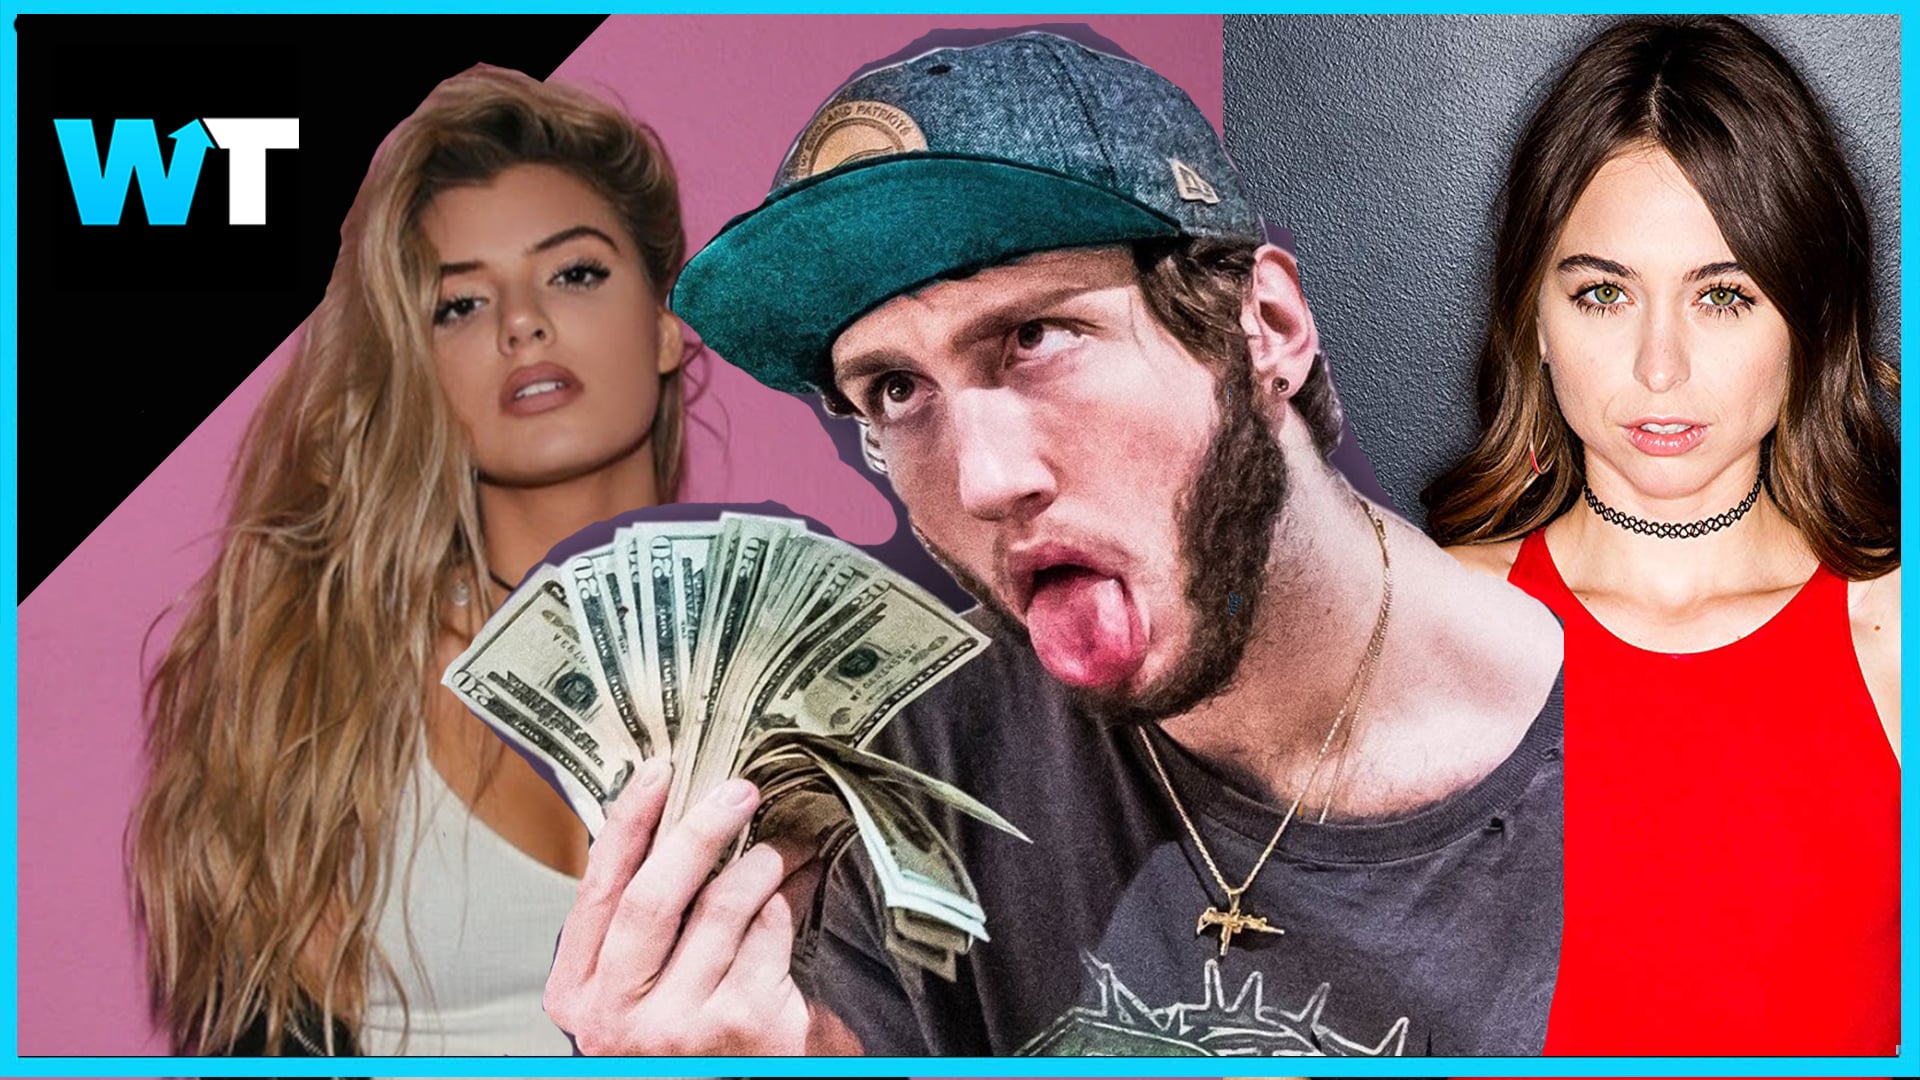 Fans URGE FaZe Banks To GO FOR IT With Alissa Violet And Riley Reid